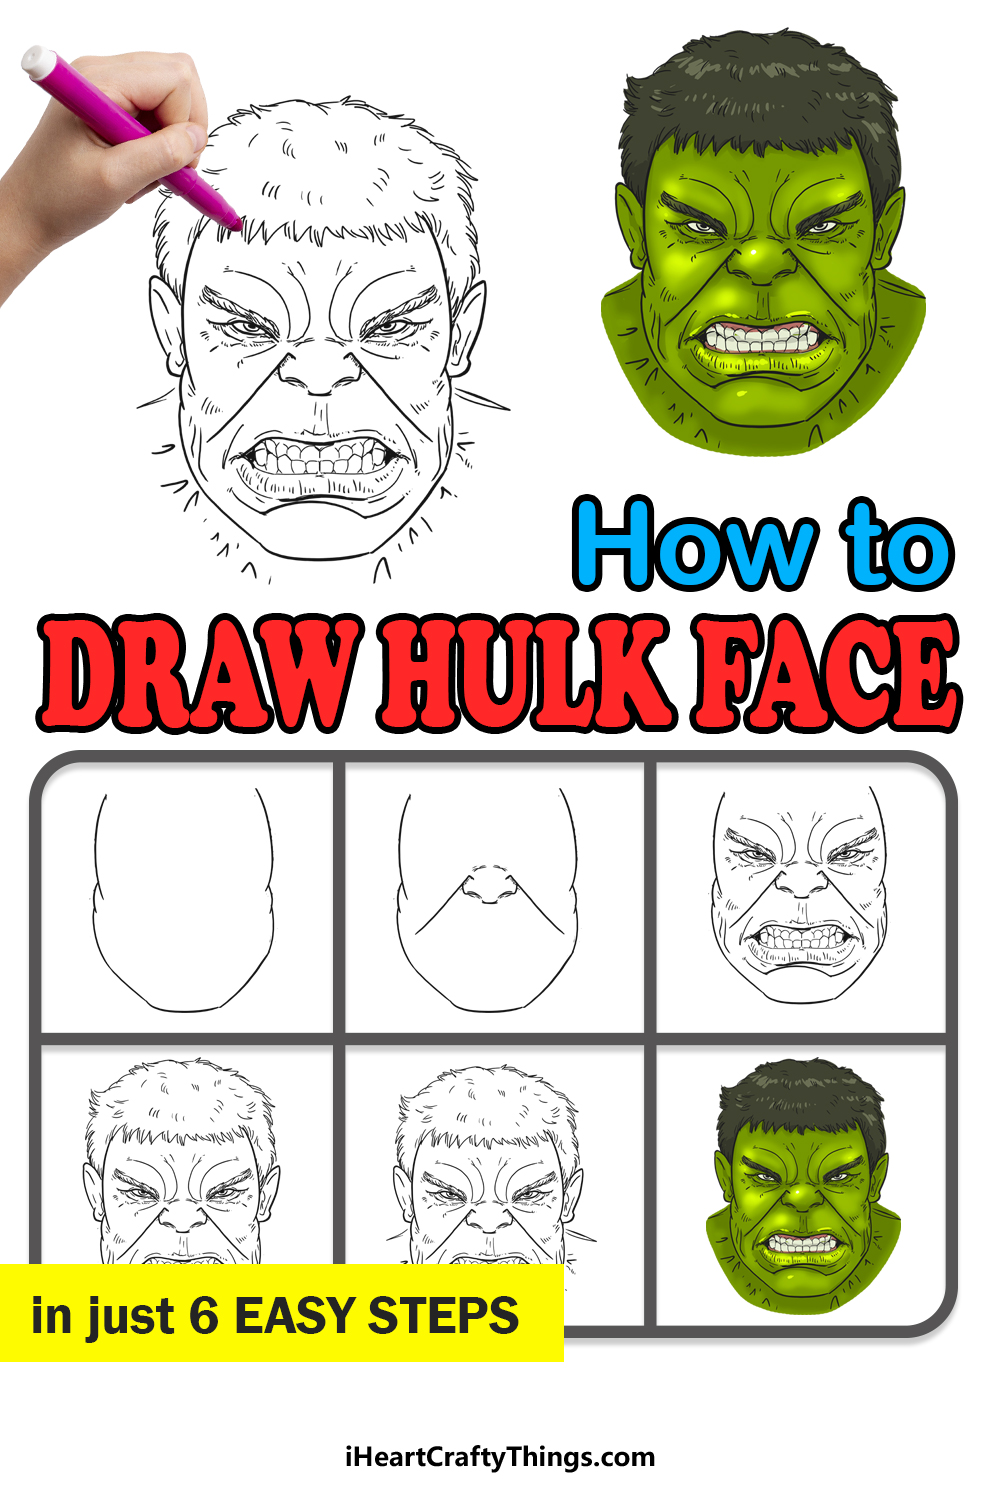 How to Draw Hulk’s Face step by step guide